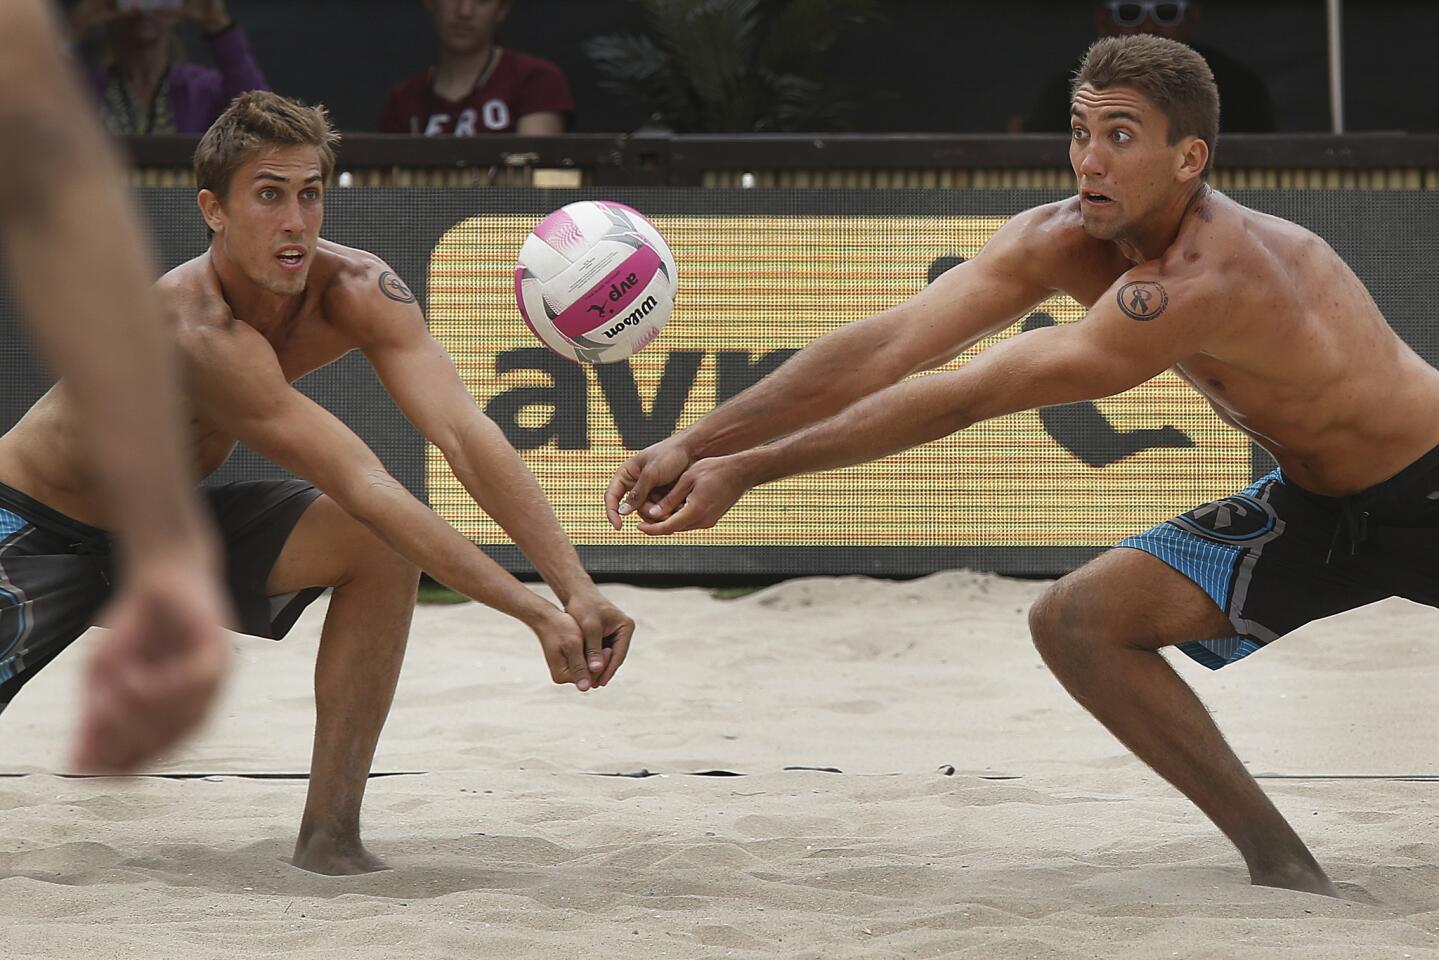 Brothers Taylor and Trevor Crabb race toward the ball during the 2016 AVP Huntington Beach Open championship.